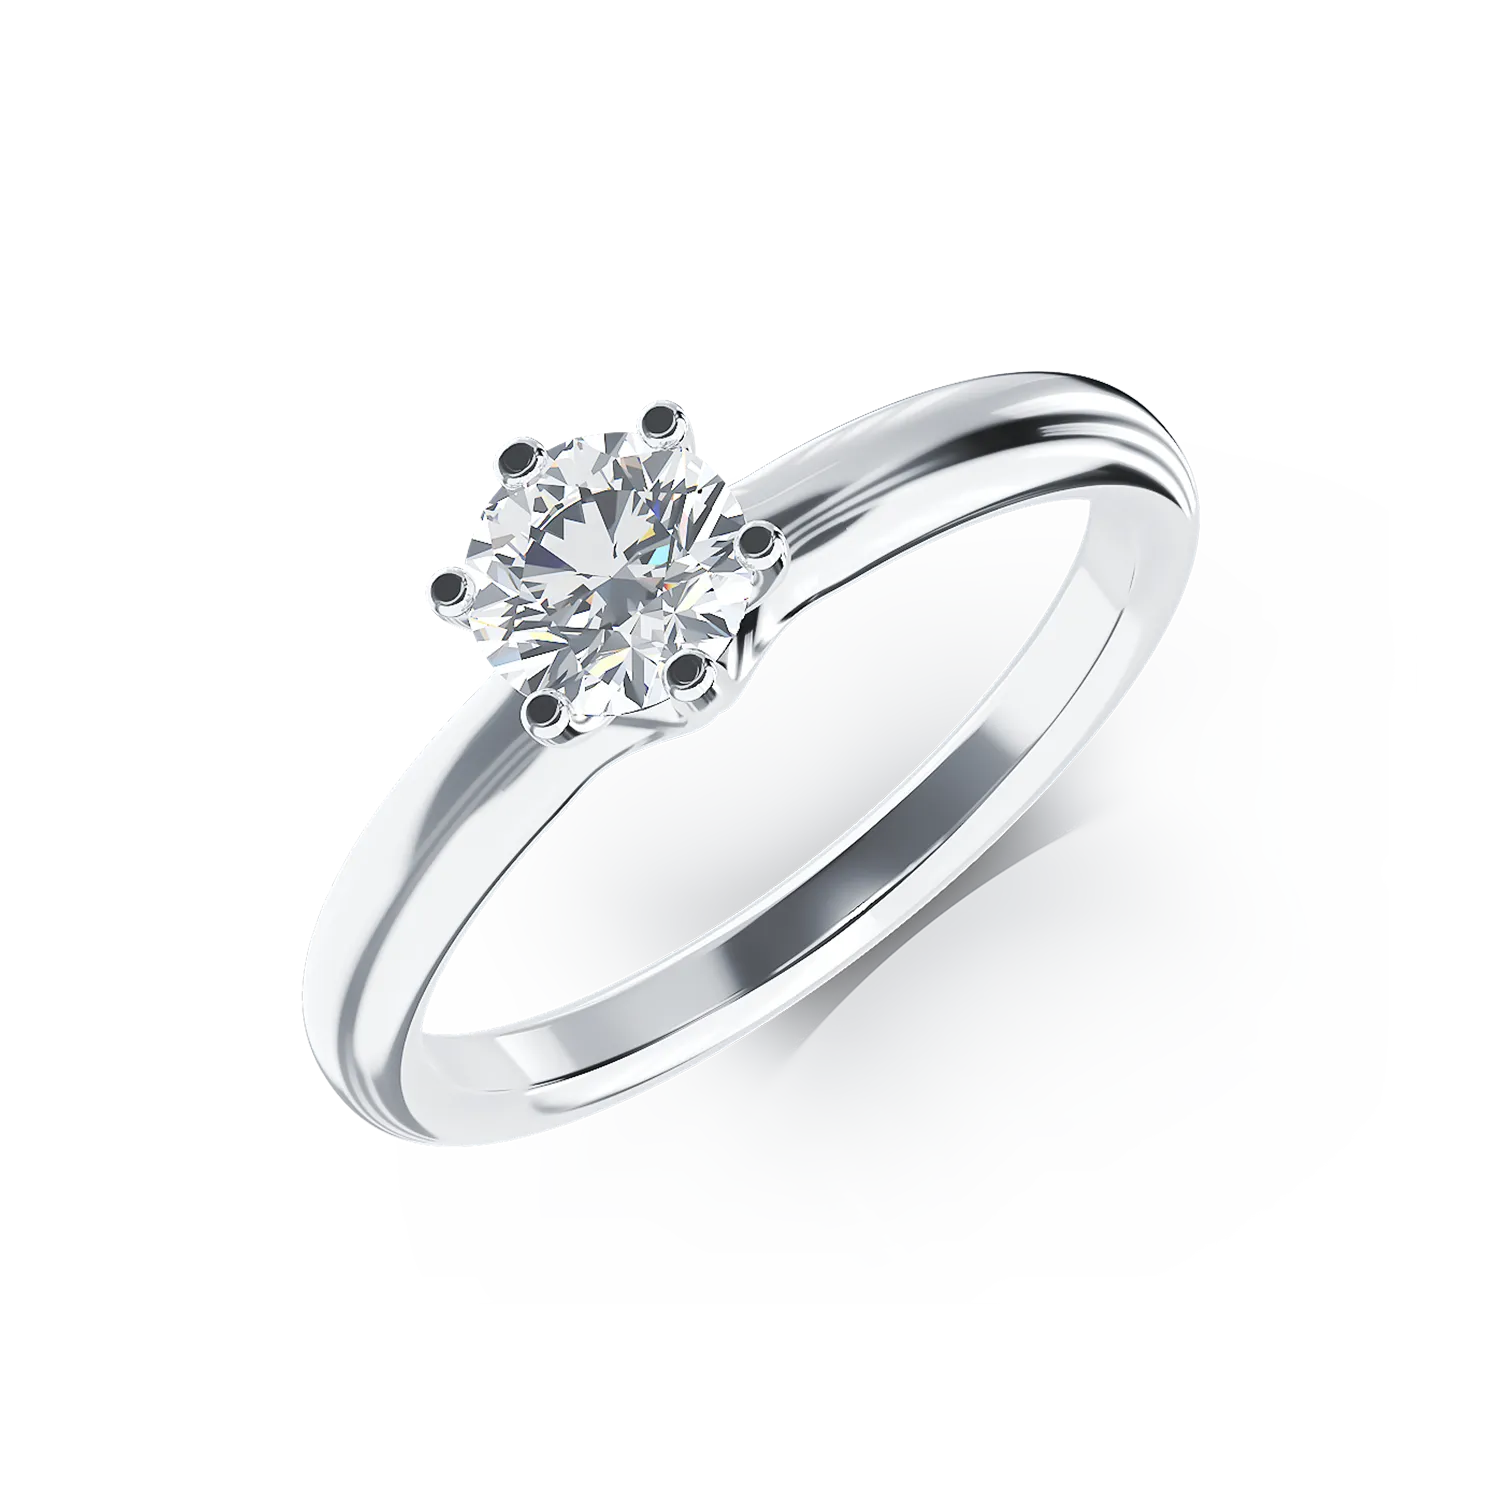 Platinum engagement ring with a 0.5ct solitaire diamond